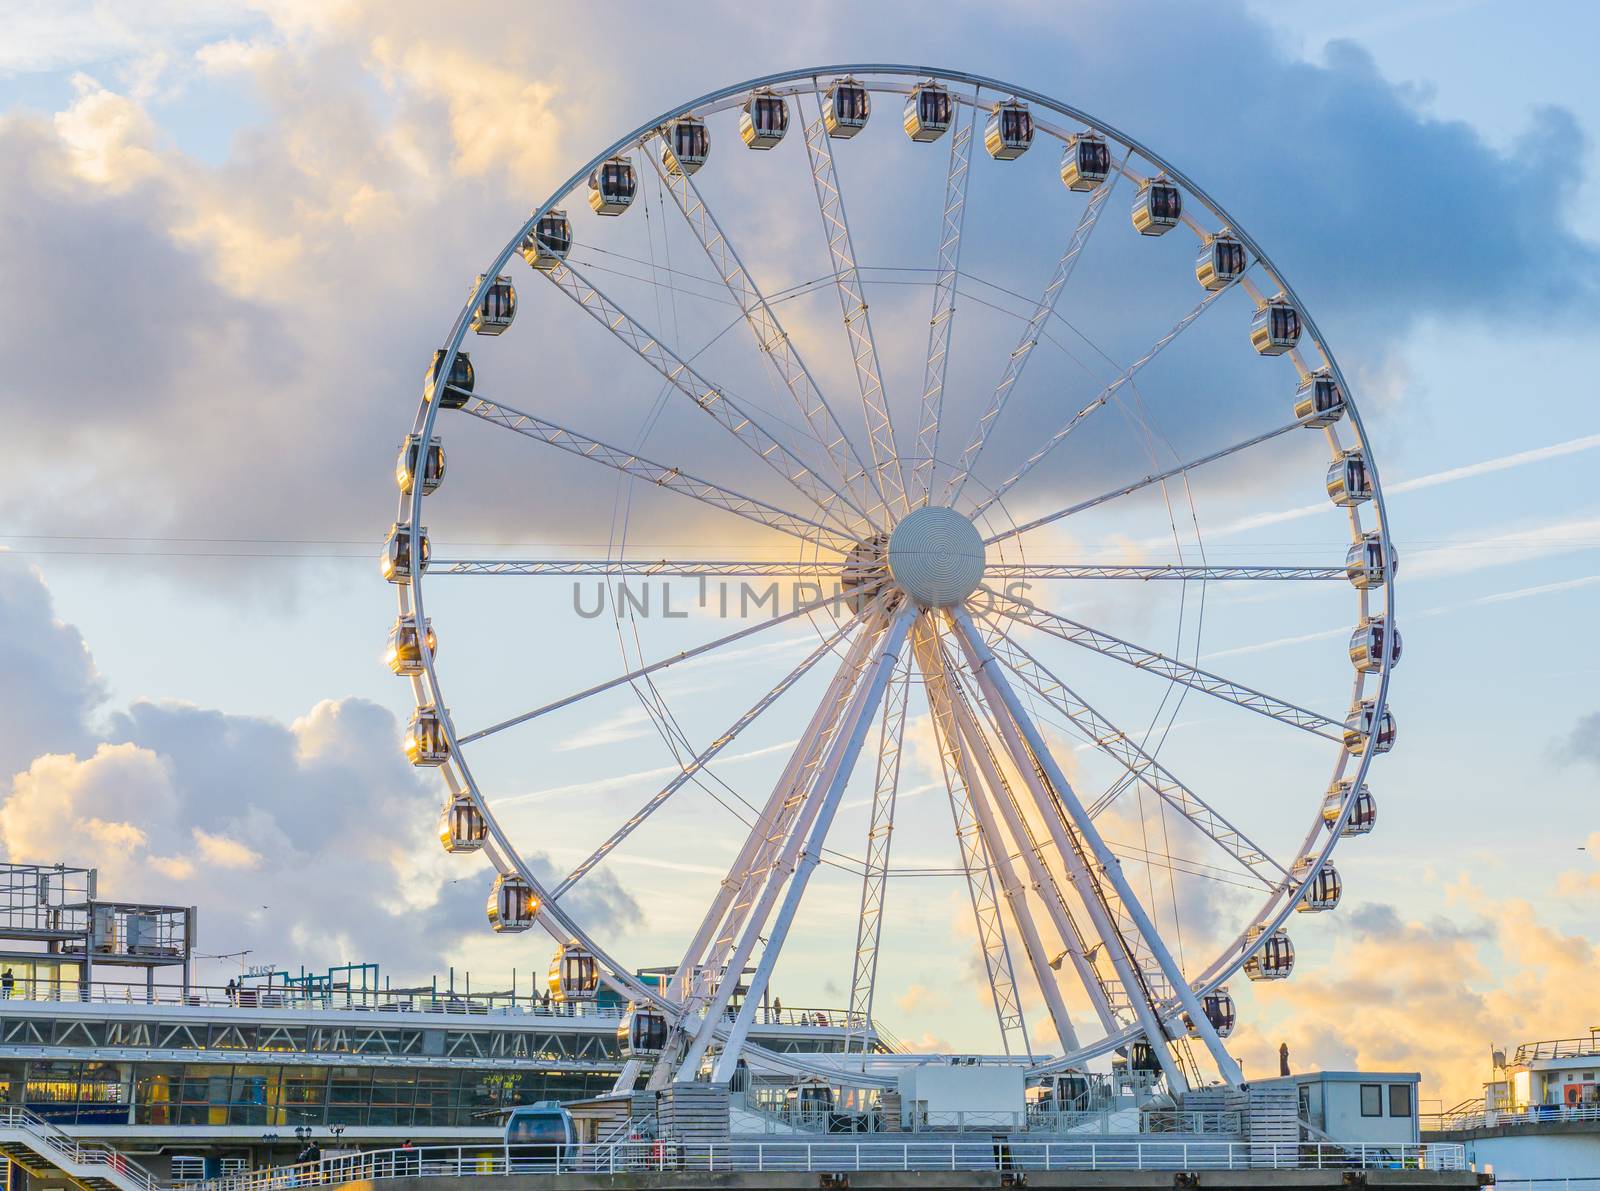 big ferris wheel attraction at the pier of Scheveningen beach Holland a well-known and touristic town